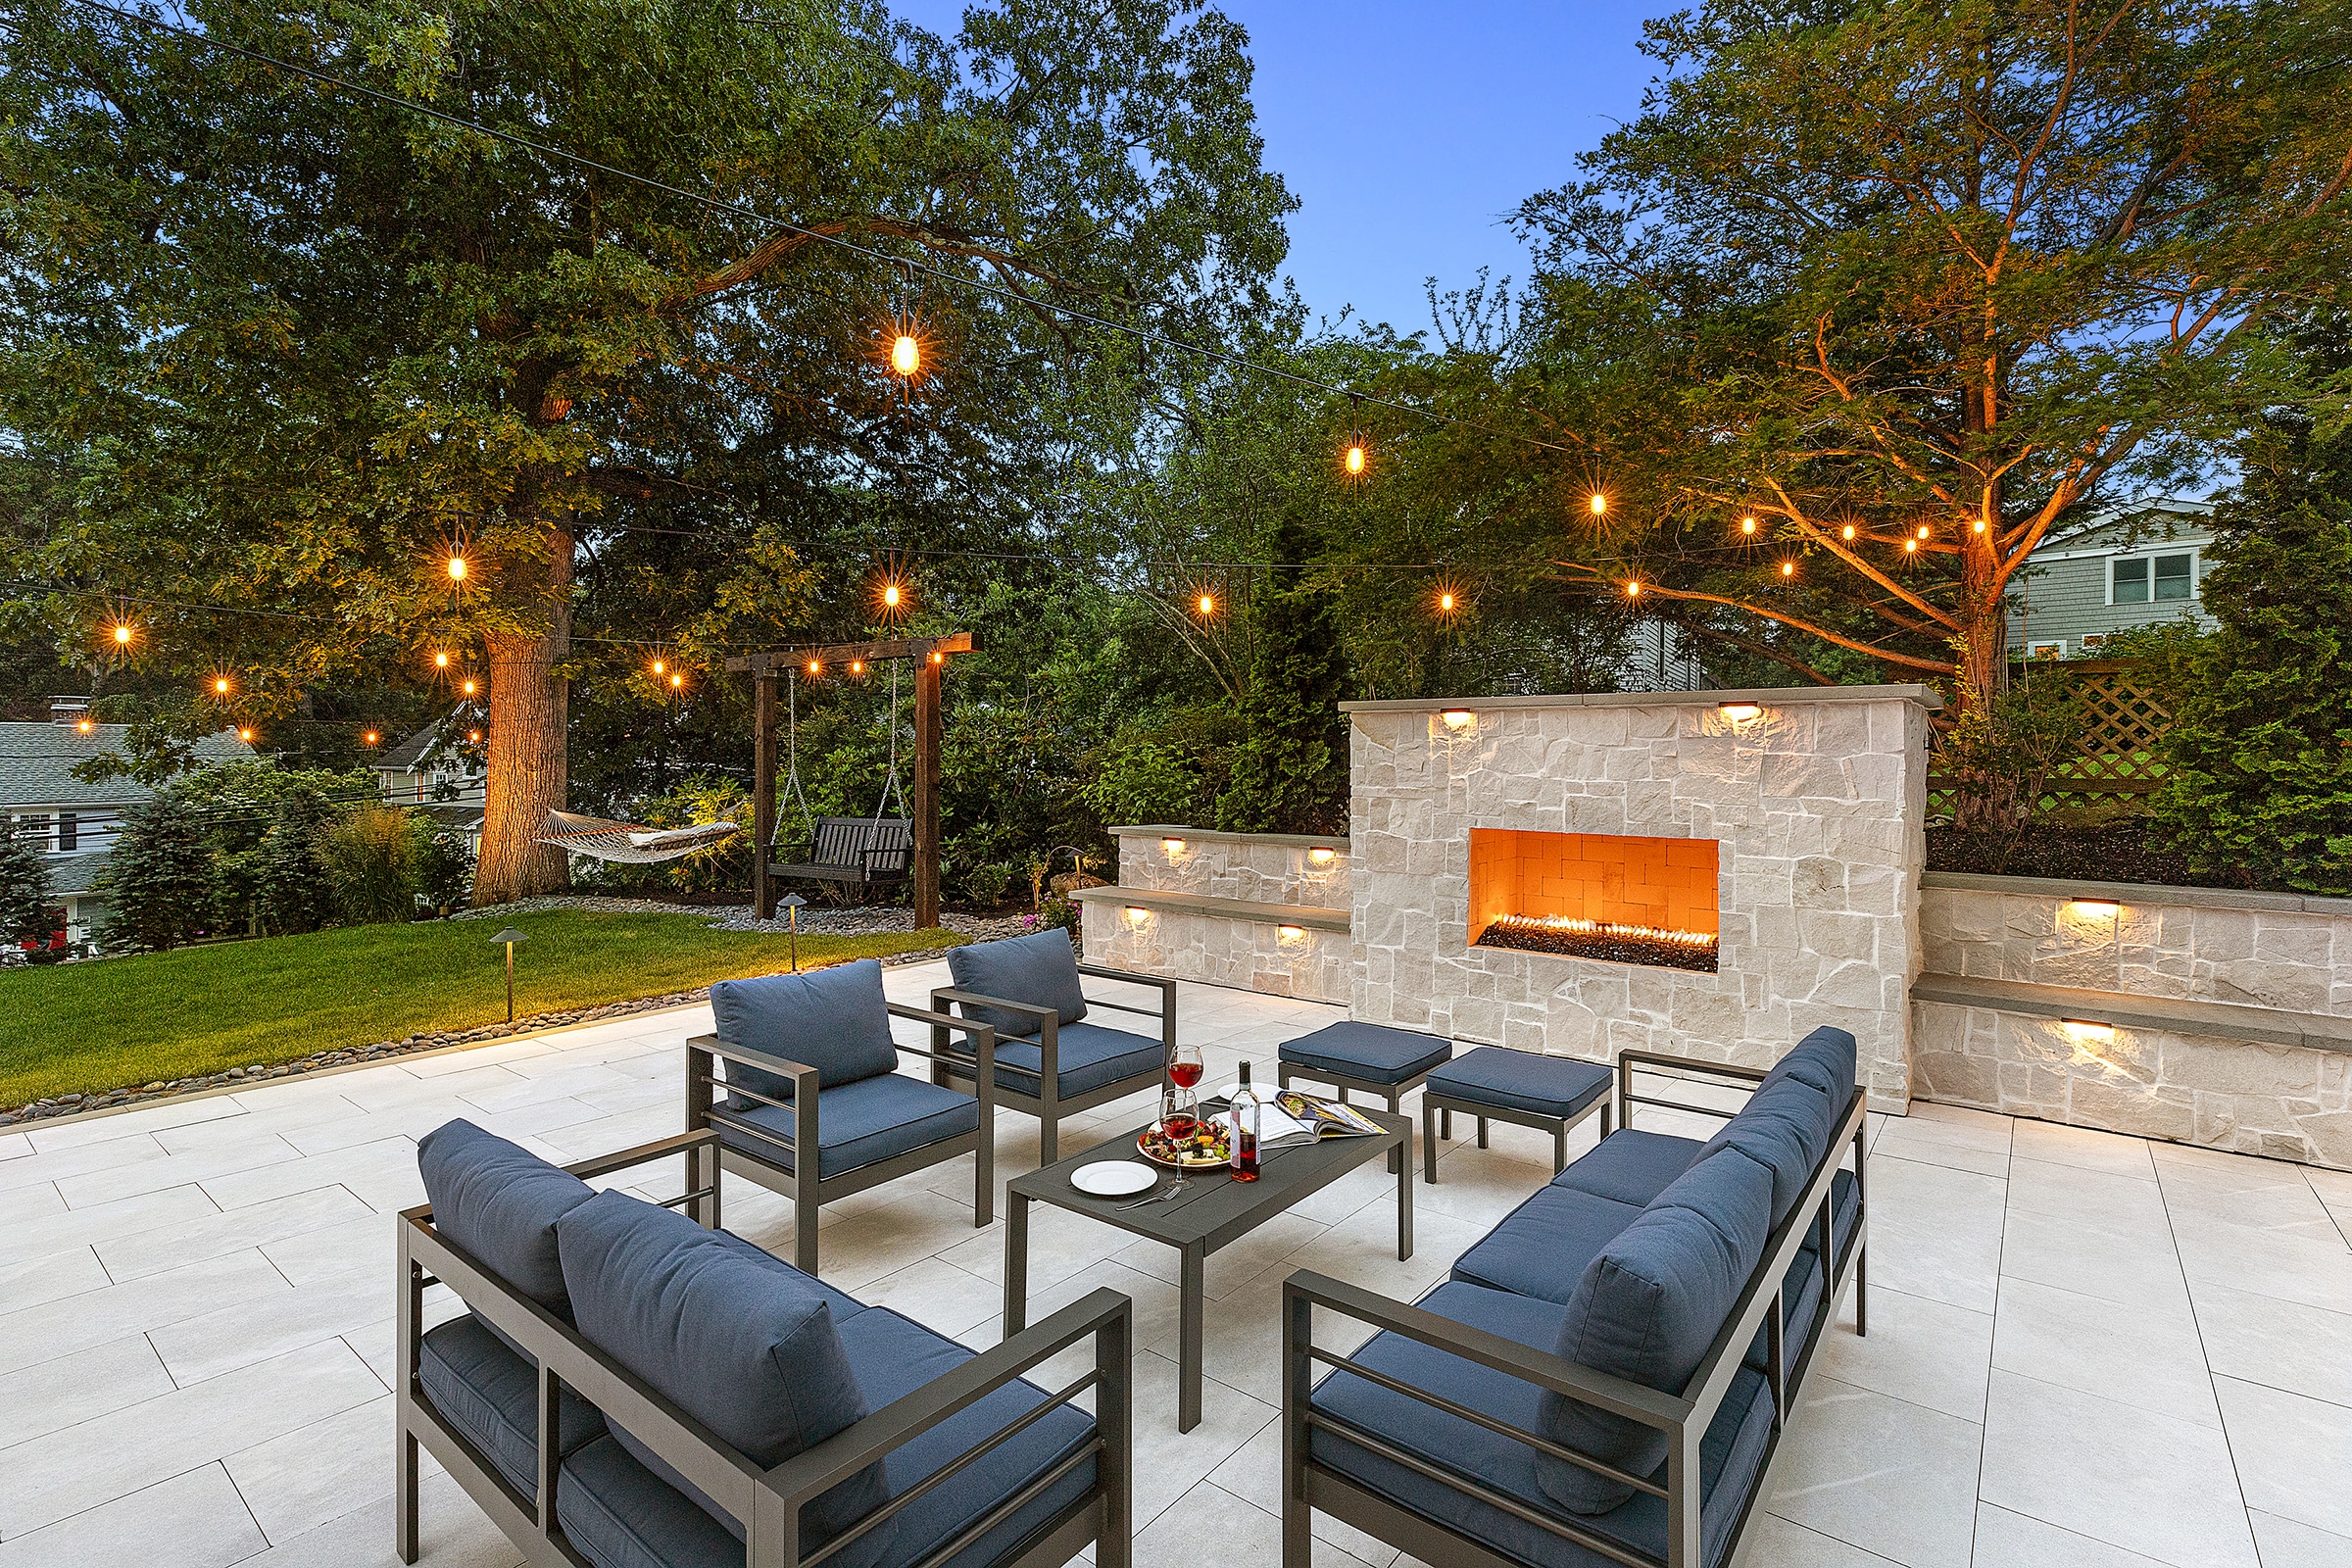 Patio furniture, with wine and cheese by a gas outdoor fireplace. Dex by Terra Hardscaping & Landscaping in Needham, MA.